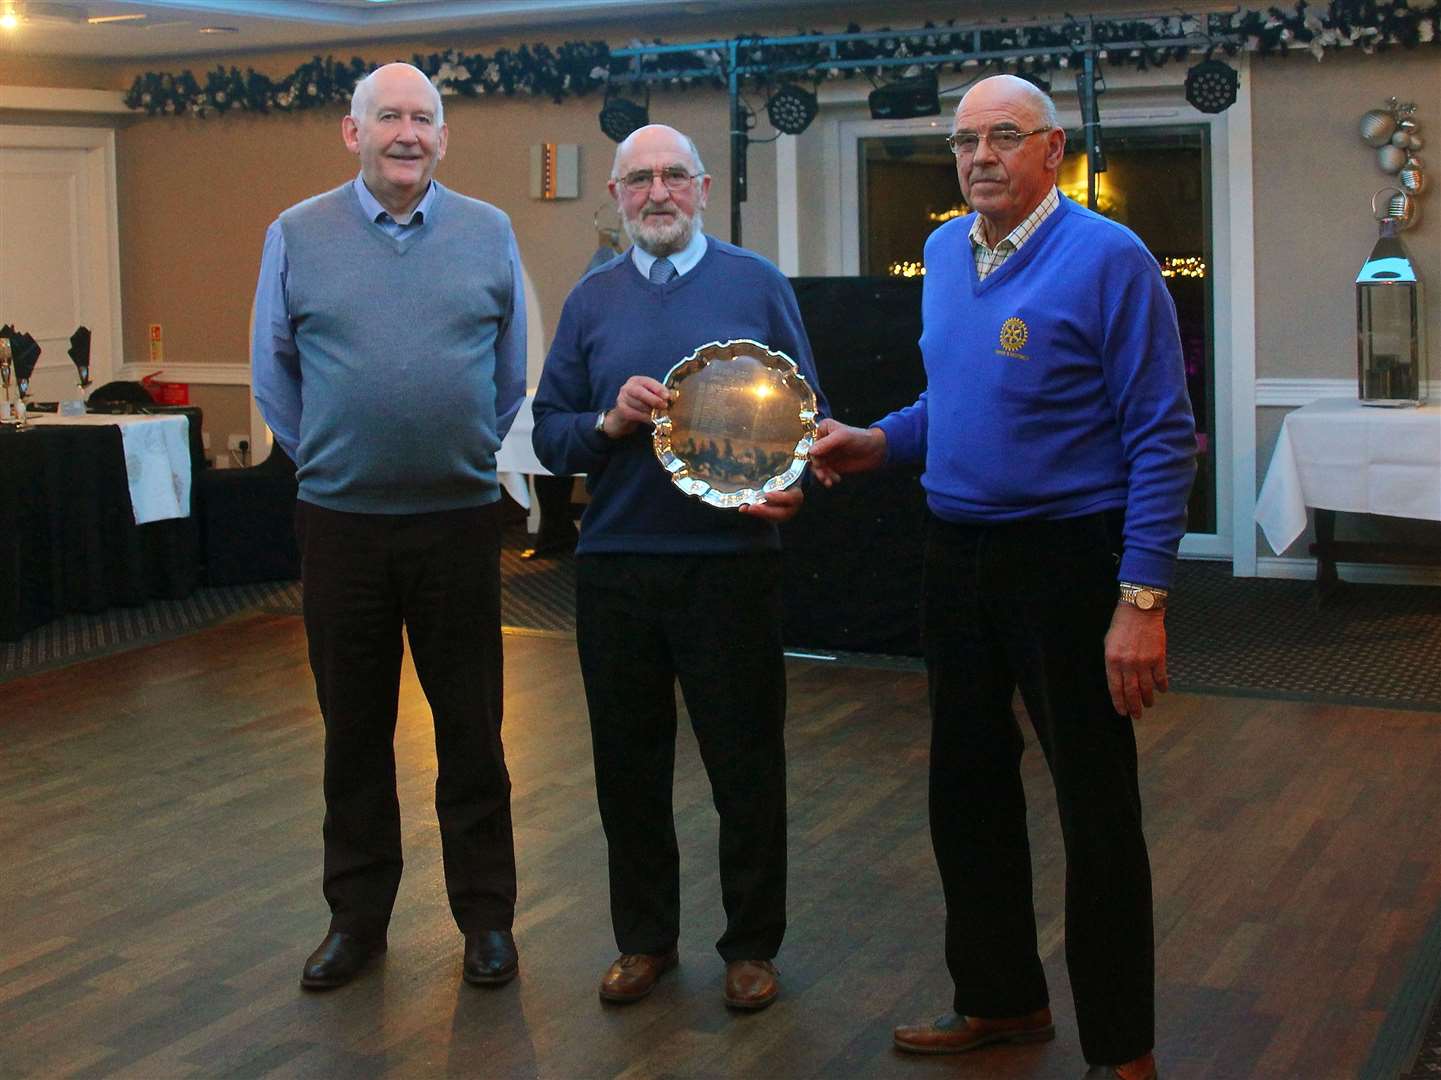 Ian Garden was invited along to Turriff And District Rotary Club's Christmas meal to receive the accolade. Picture: Kirsty Brown